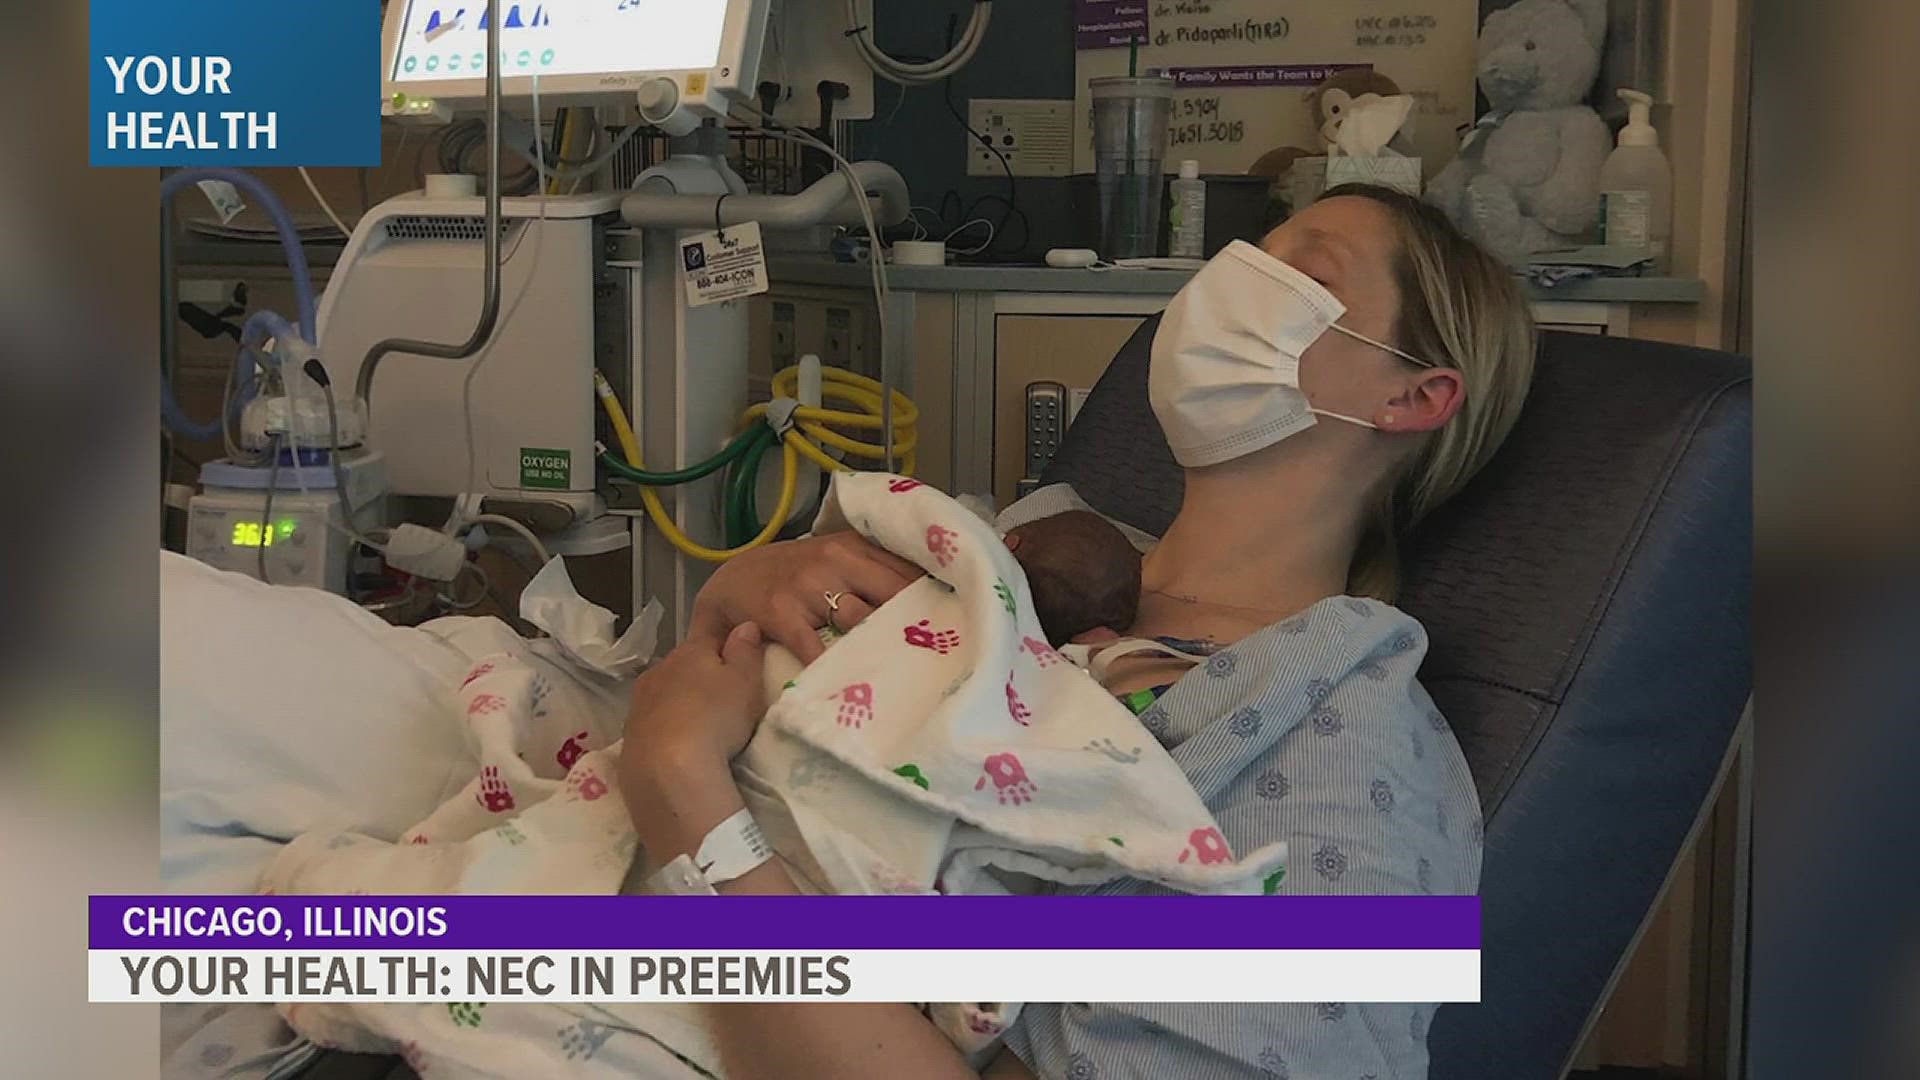 NEC (or necrotizing enterocolitis) causes intestinal tissue to die in preemies. But now, researchers may have found what causes it and how to prevent it.